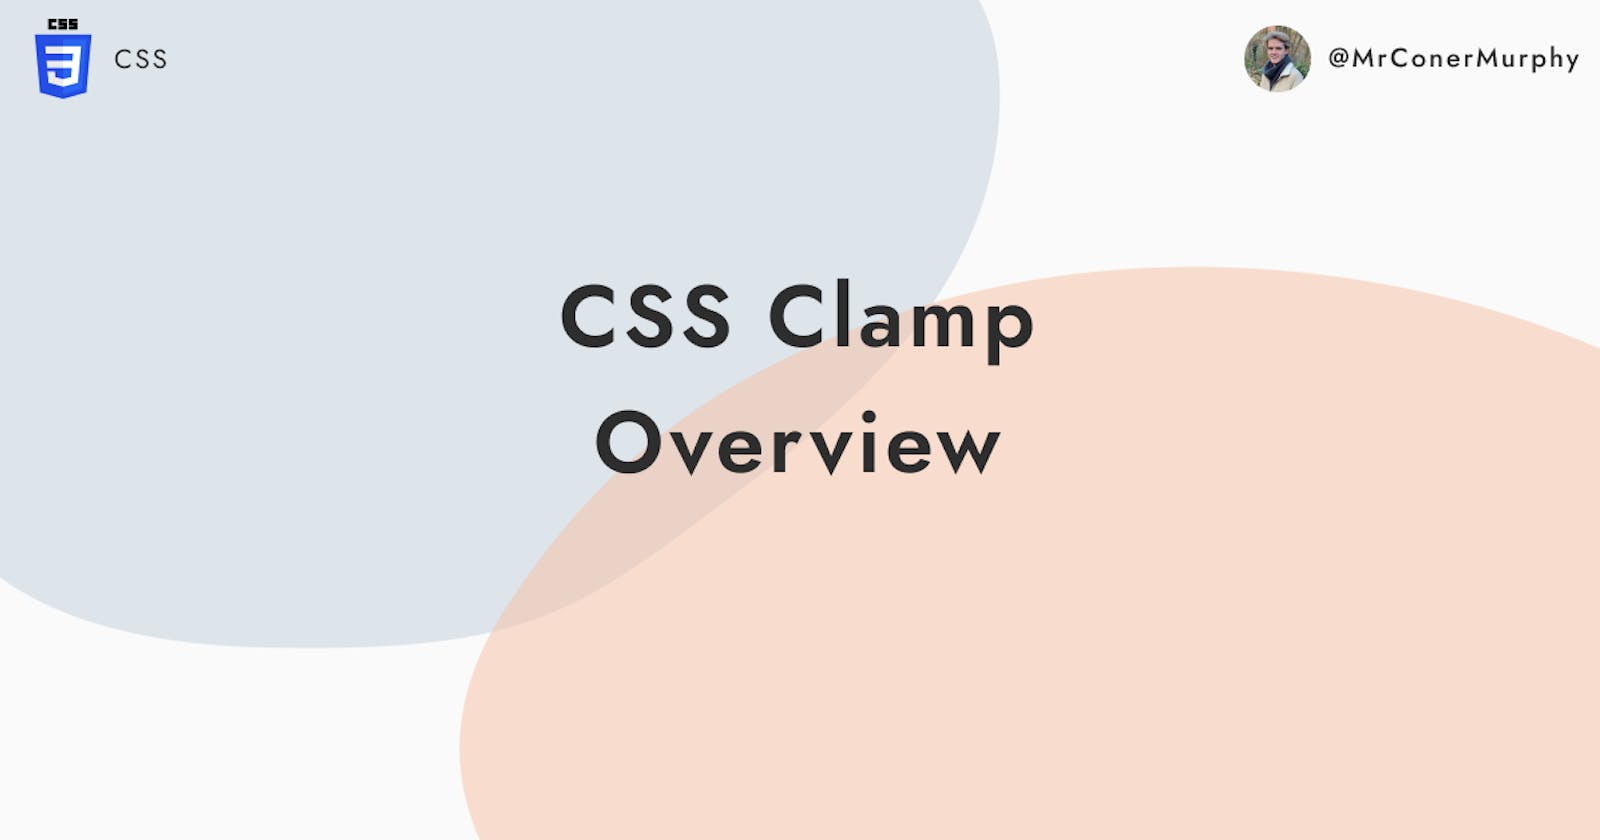 CSS Clamp Overview